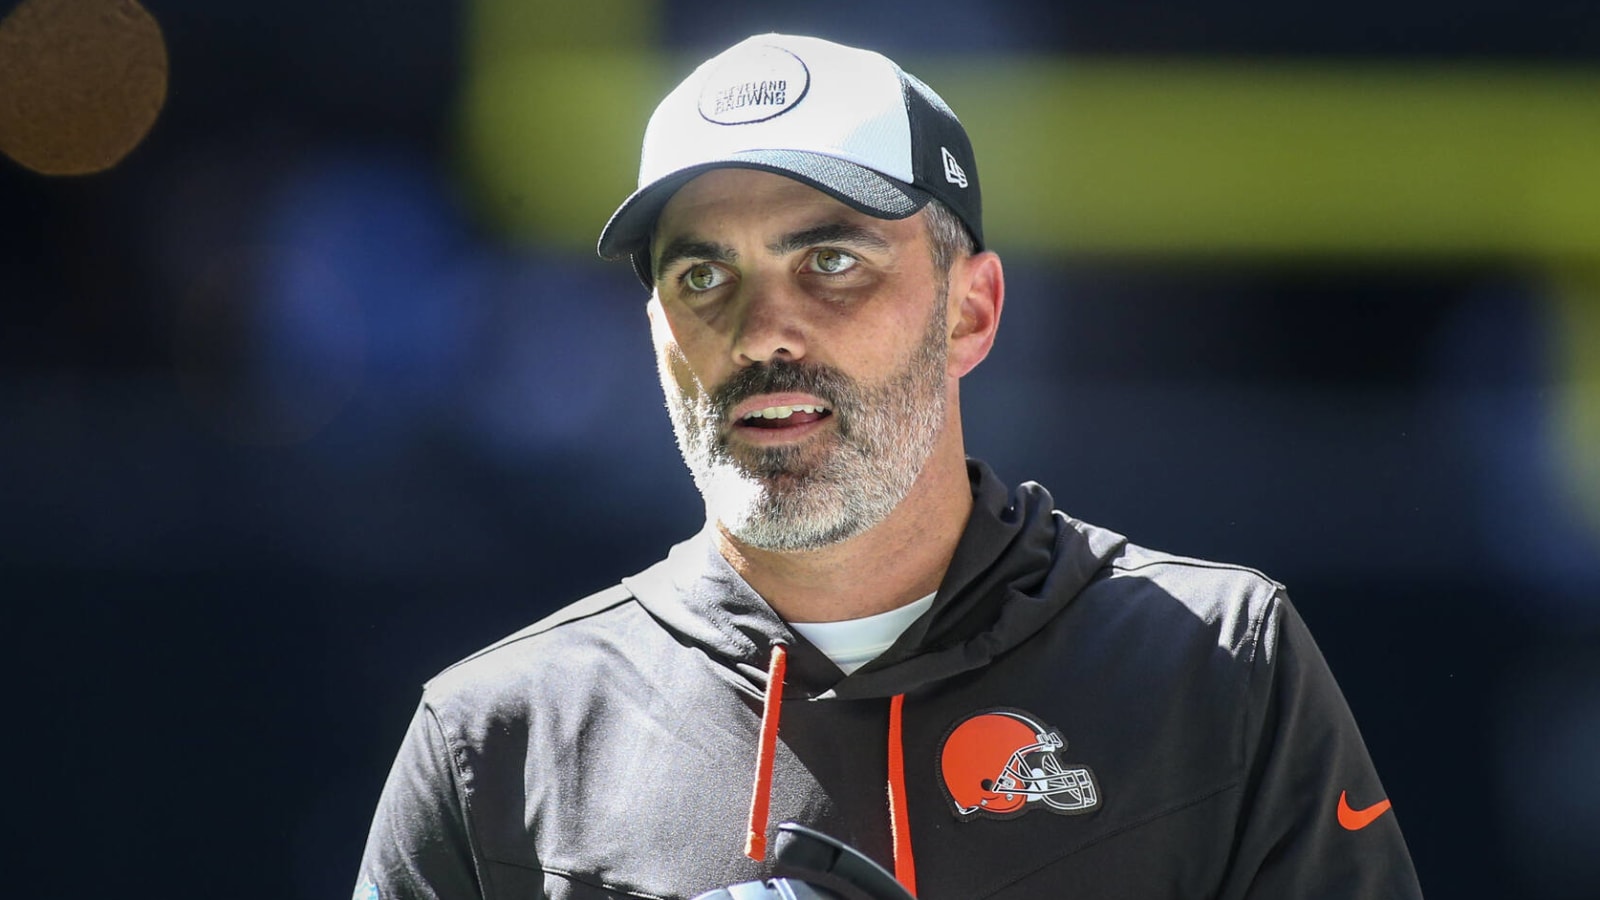 Browns HC praises rookie after first day of minicamp